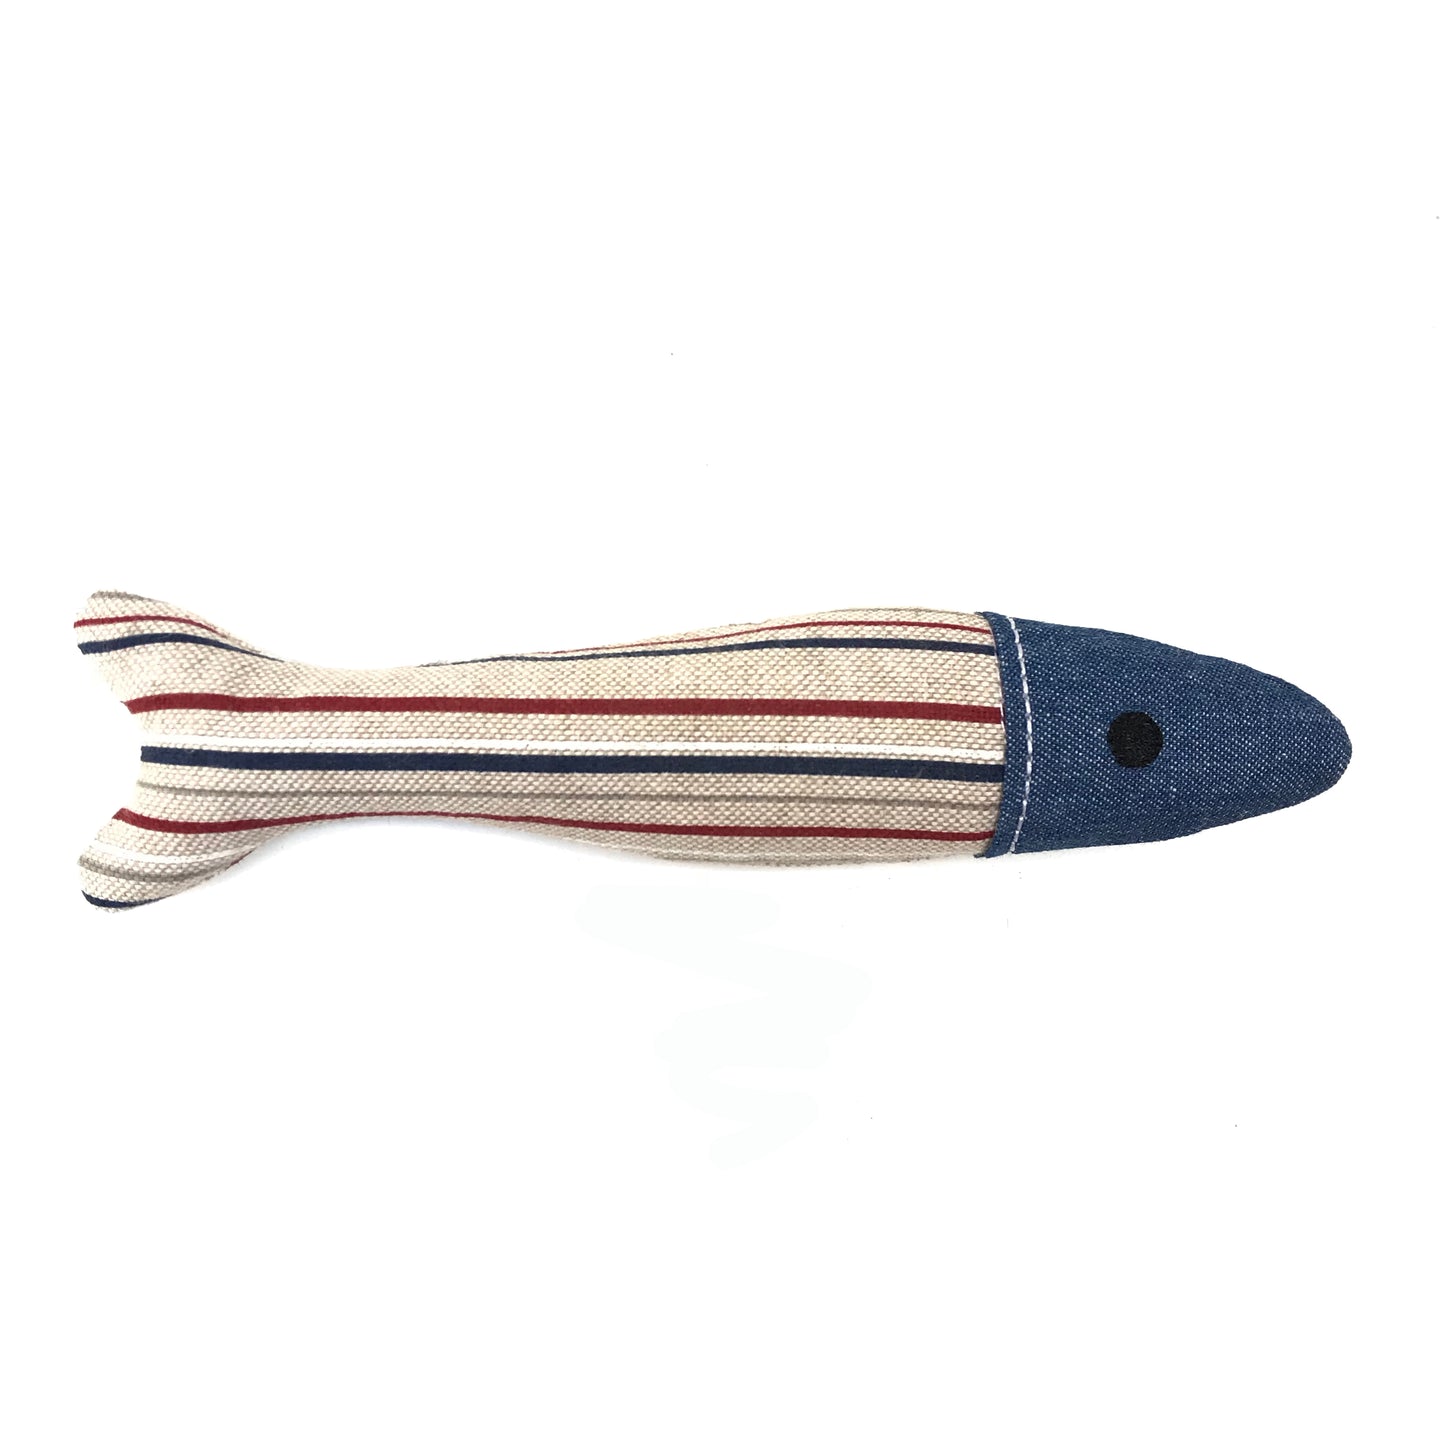 Freak Meowt Luxury Cat Toys, Gifts for Cats Valerian Root Sardine, Best Cat Toys, Handmade in Wales